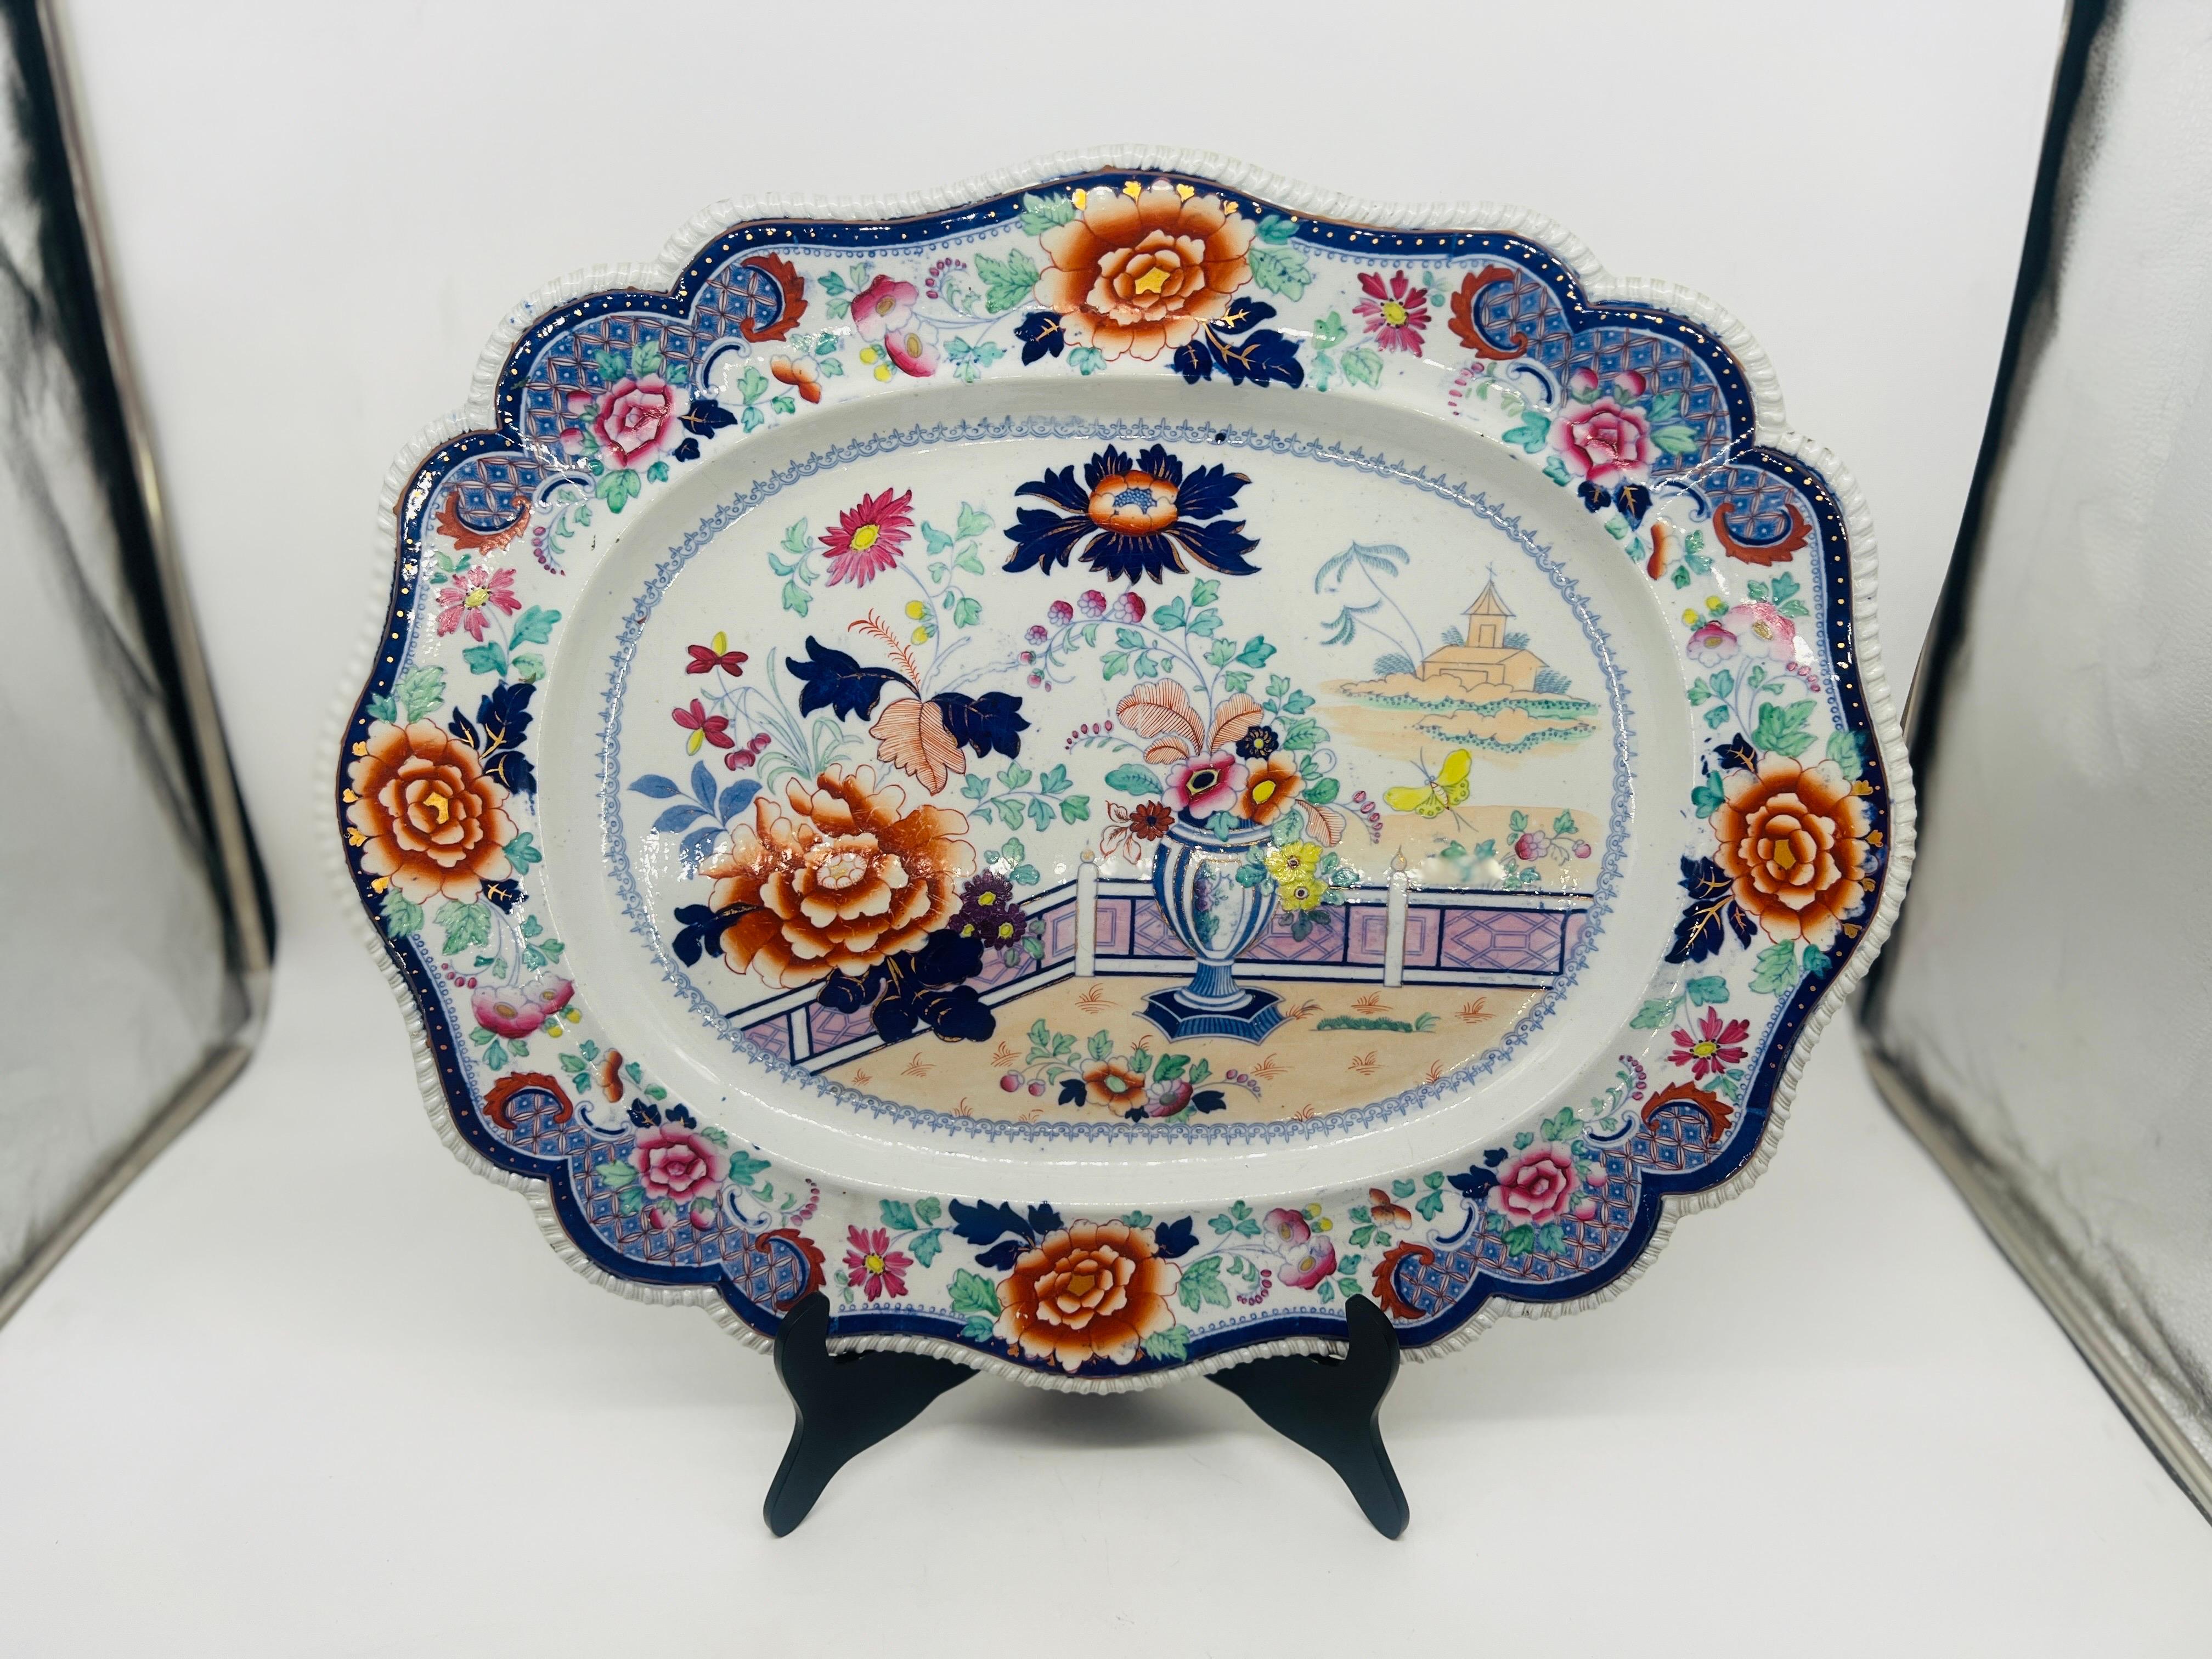 Monumental Hicks & Meigh English Ironstone Porcelain Platter, circa 1810
This Hicks & Meigh platter is very rare not only for its size and decoration, but the fact Hicks & Meigh was only active from 1804-1822. 
Originally sold by the famous